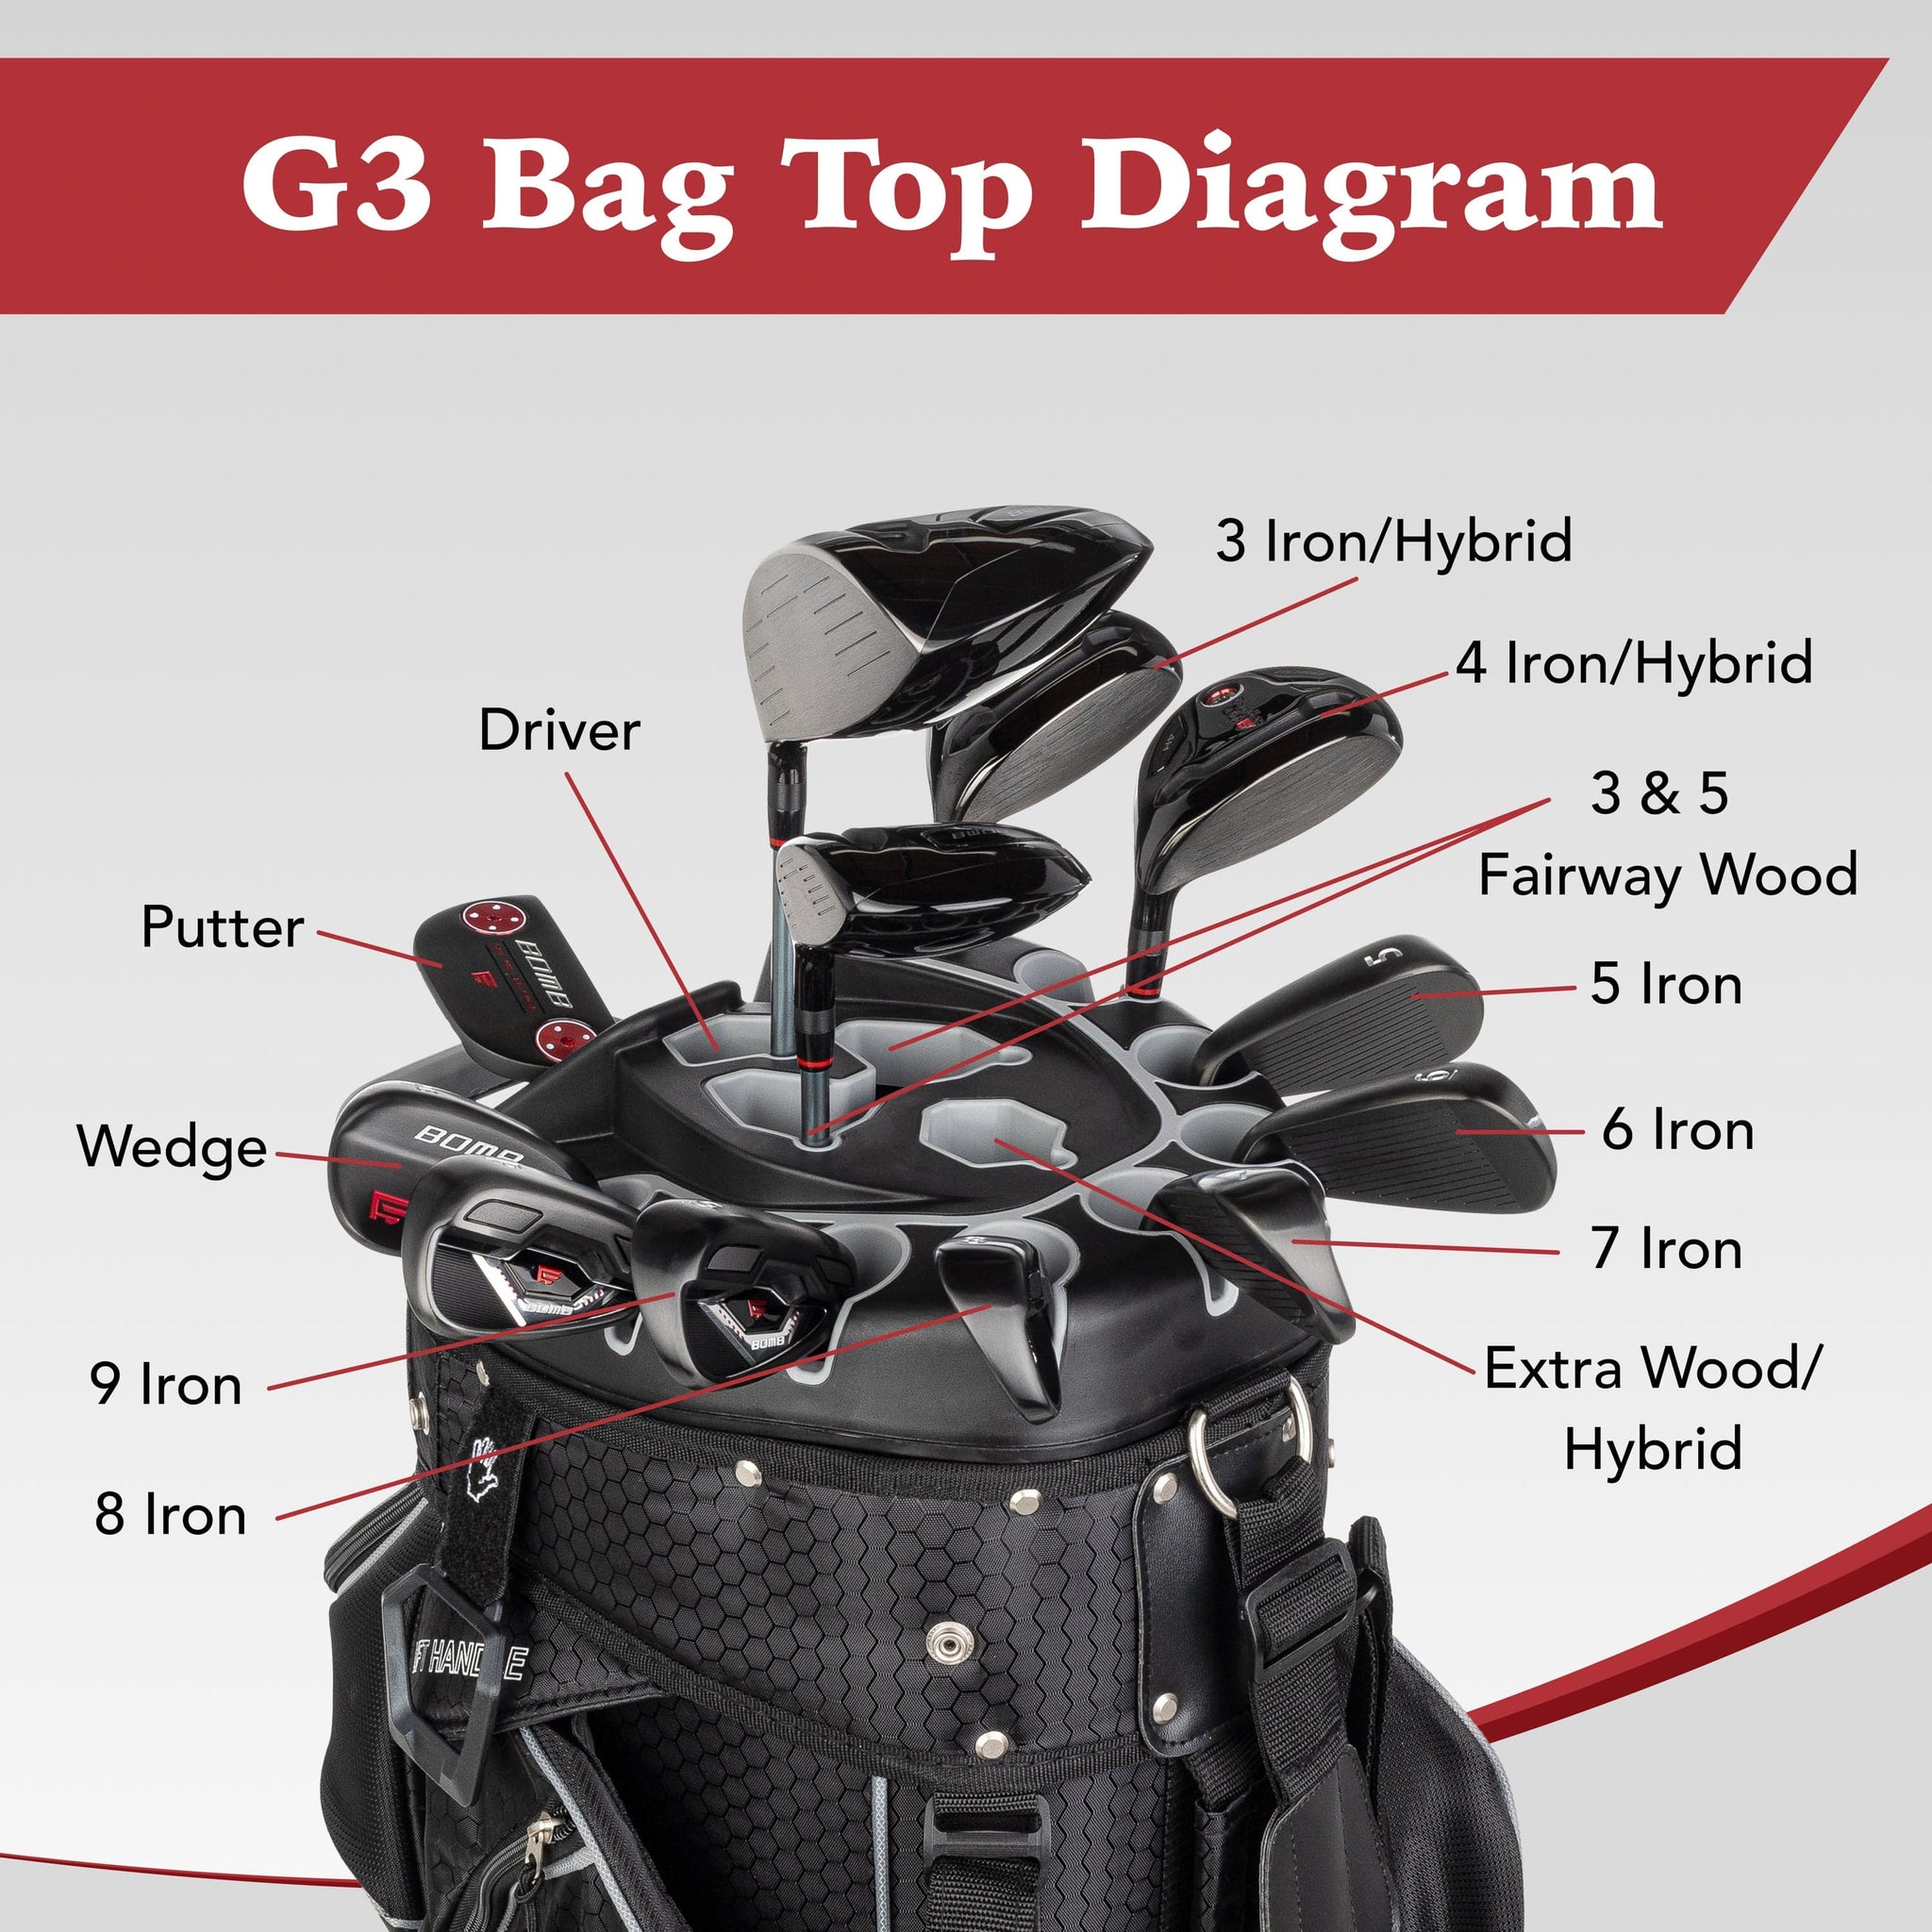 What's In Your Golf Bag? - Best Combination of Clubs - Free Online Golf Tips